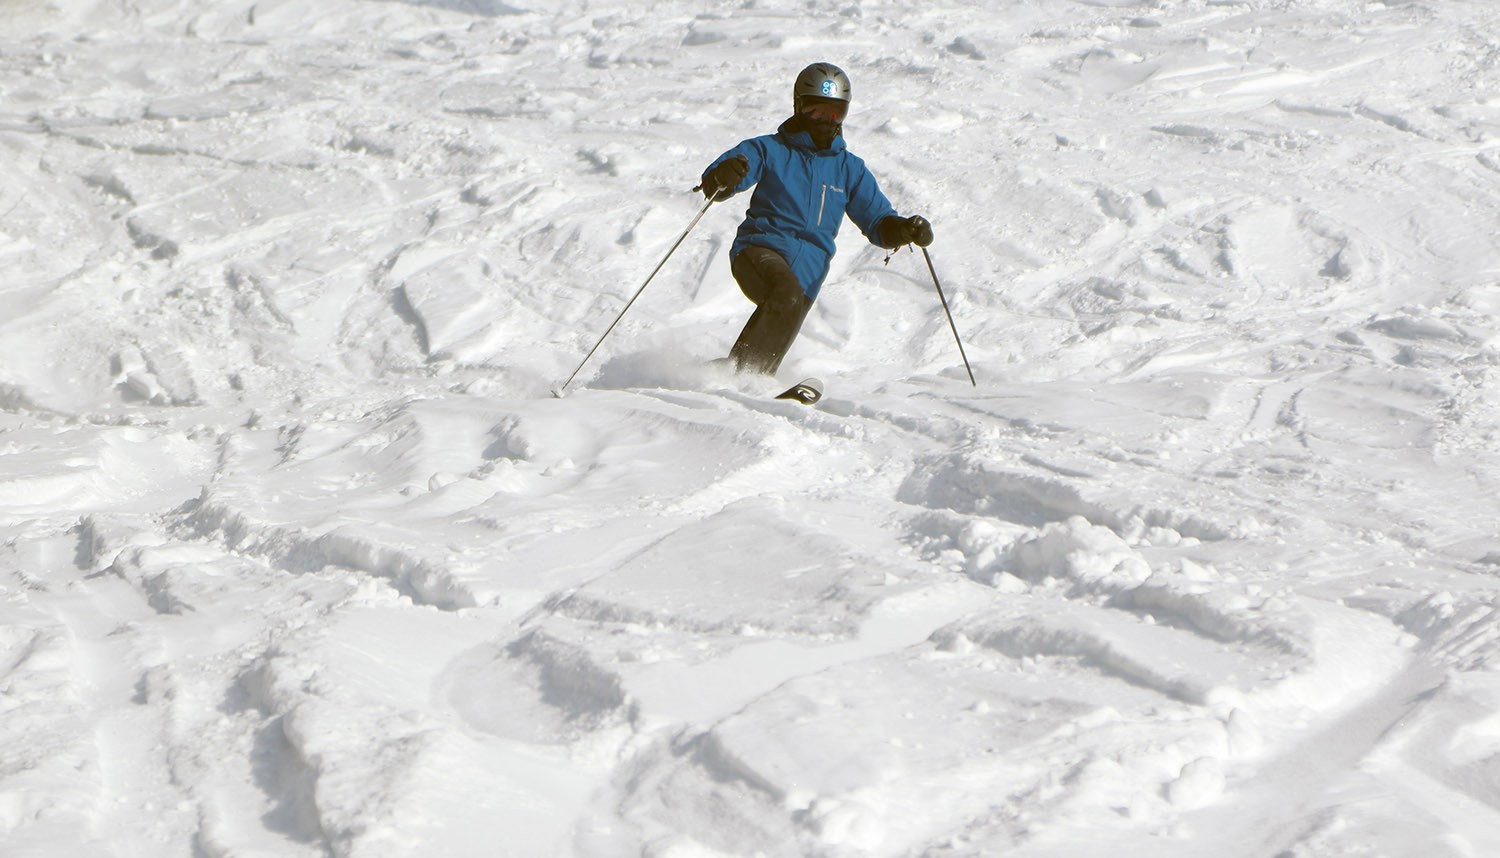 Erica Telemark skiing in some chopped up powder on the Showtime trail at Bolton Valley Ski Resort in Vermont